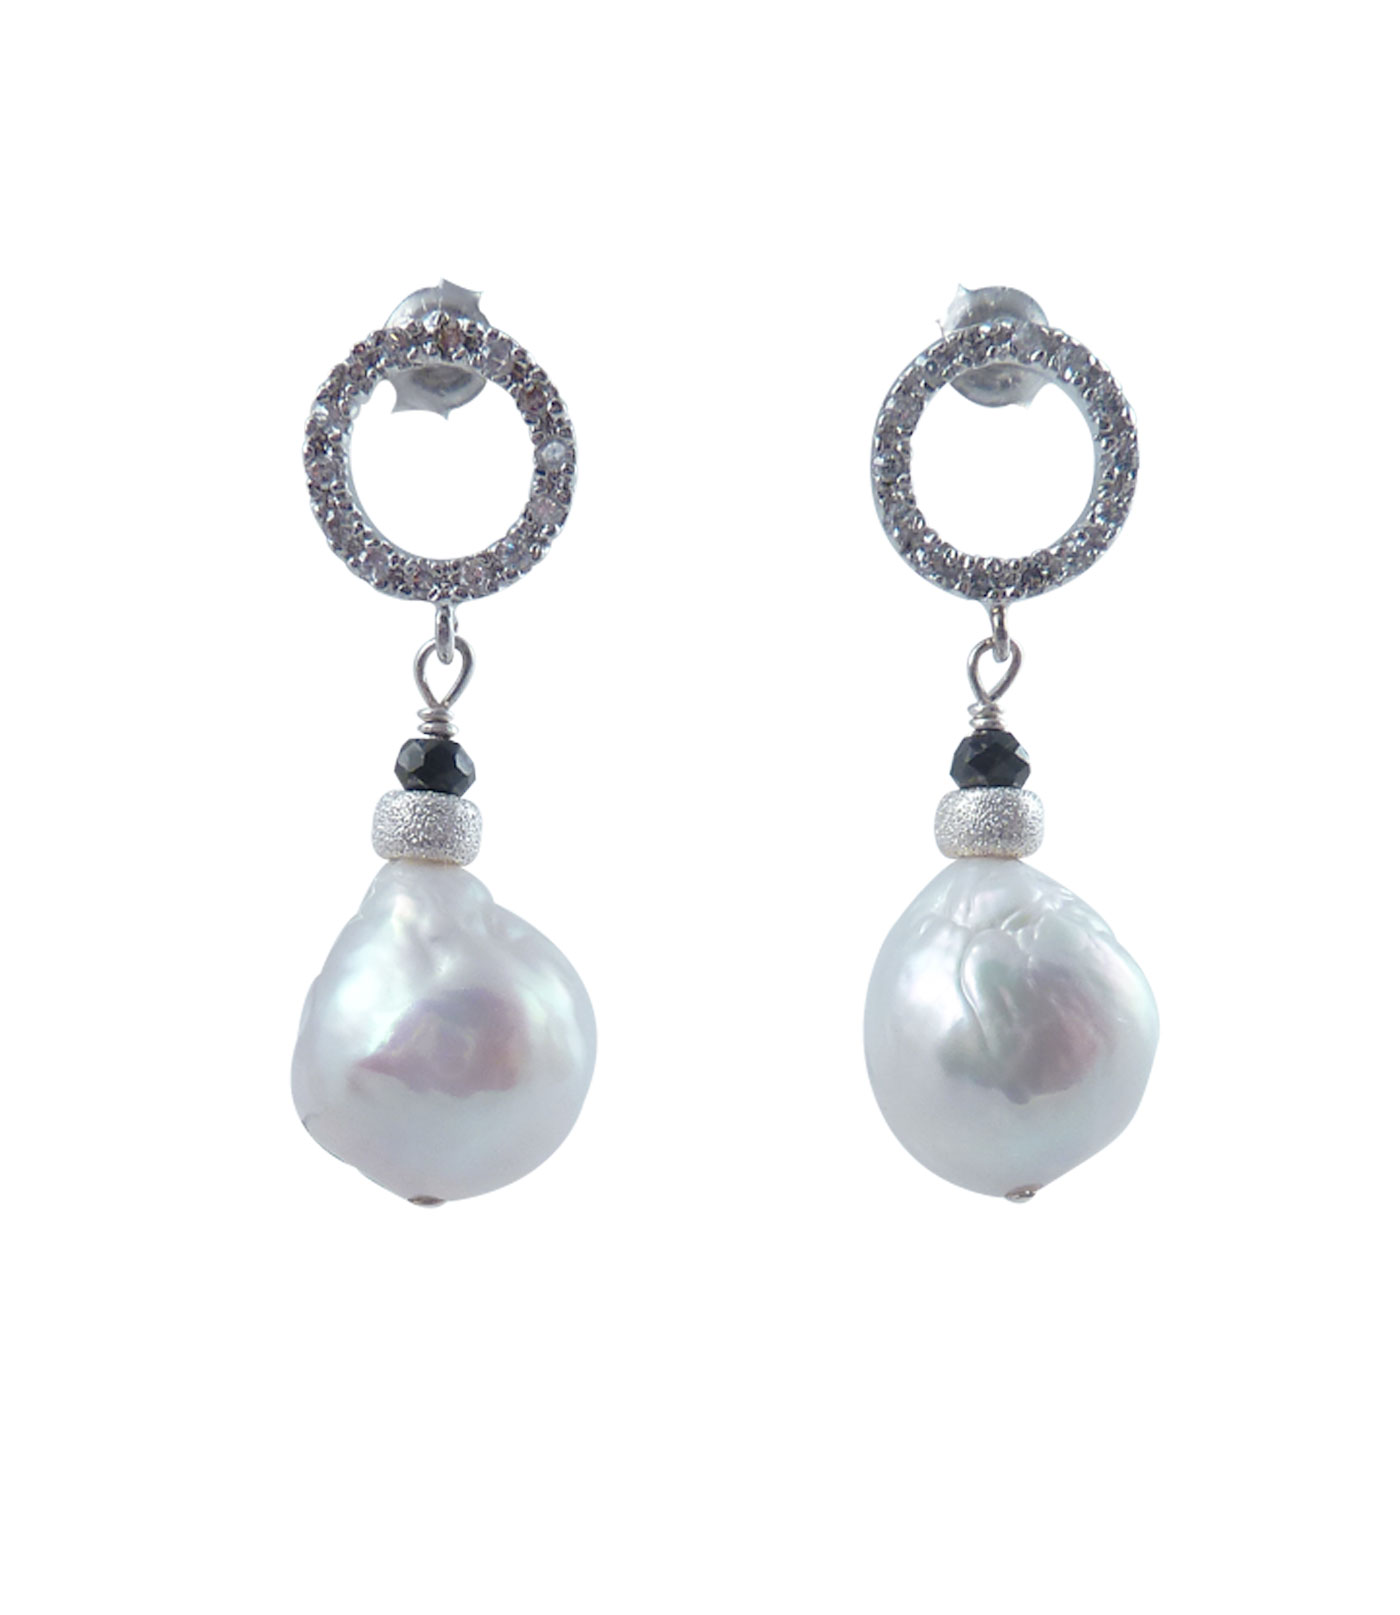 Pearl earrings black spinel . White pearl jewelry features ripple pearls